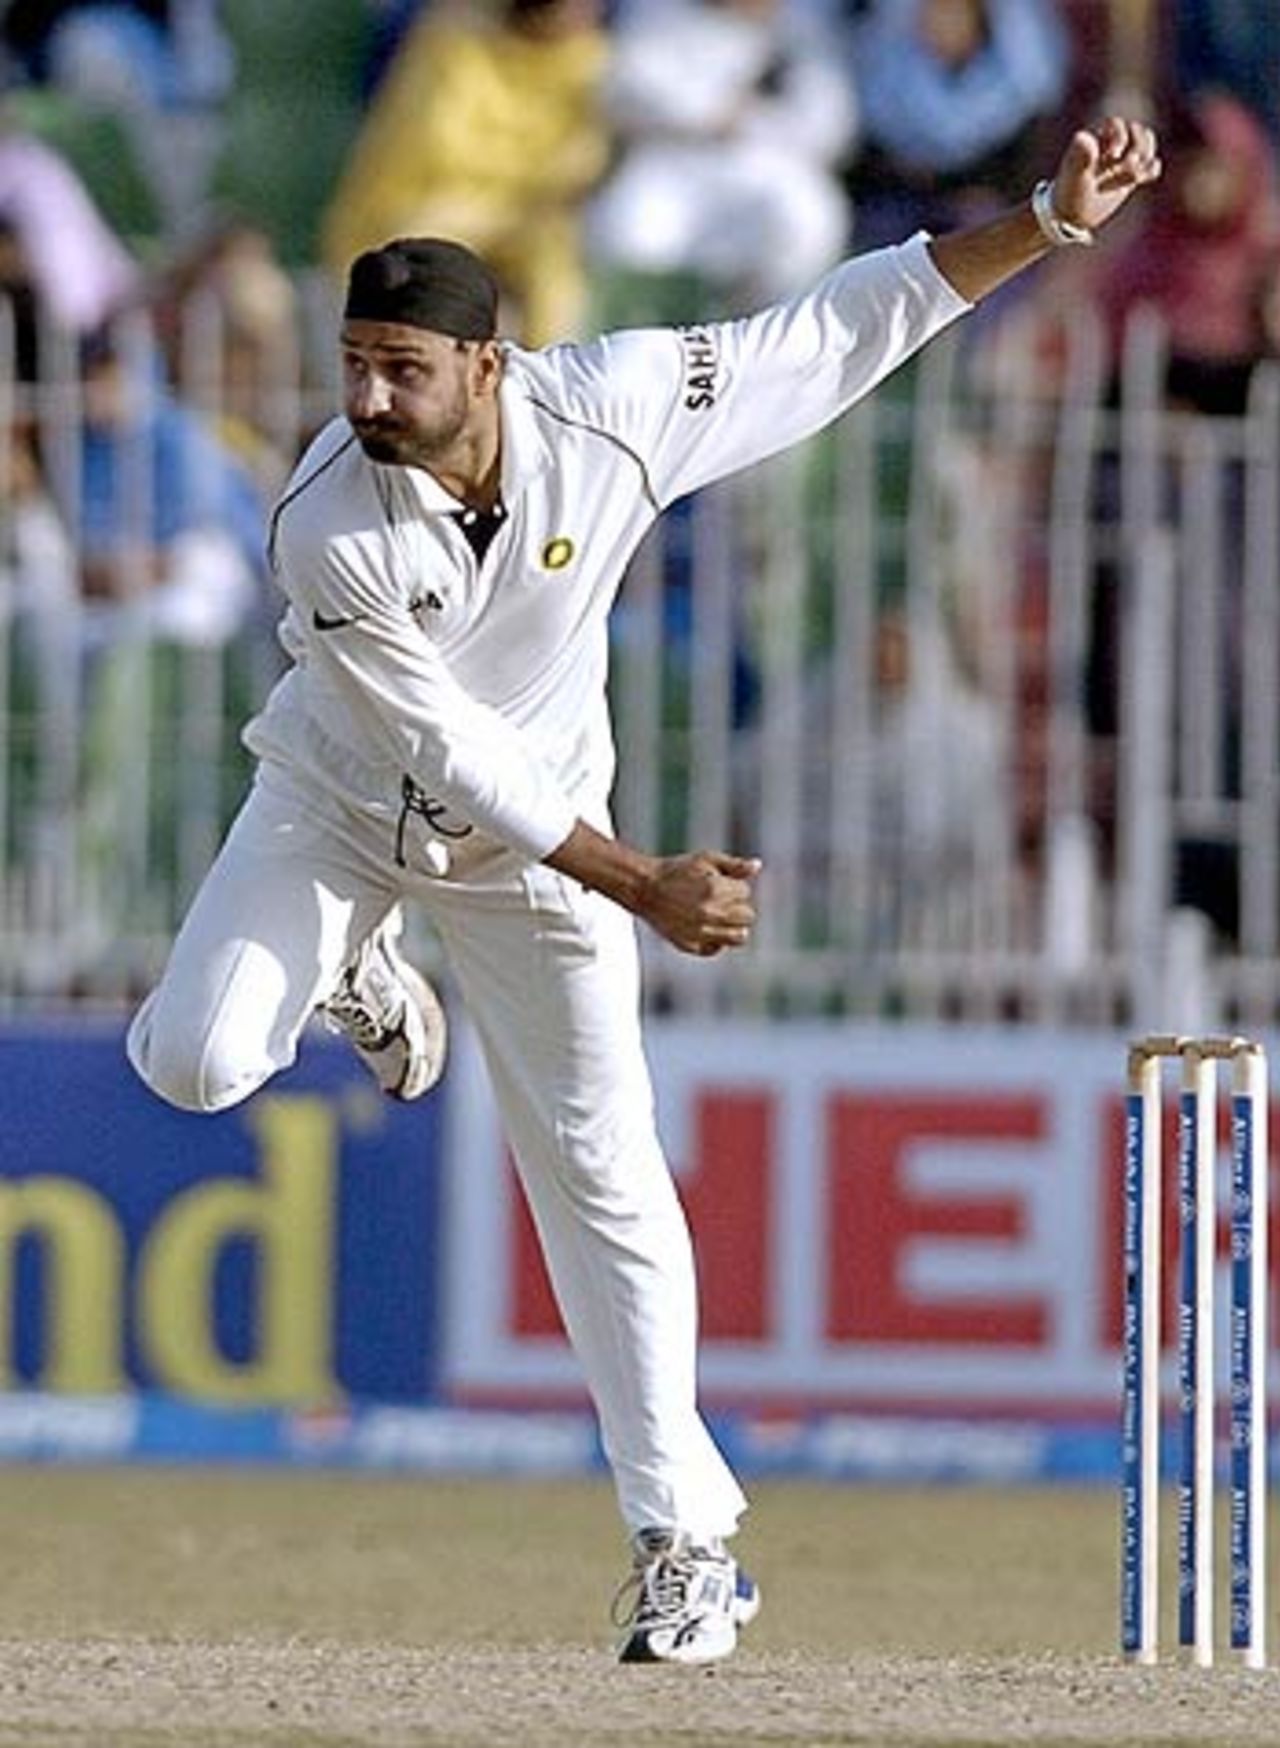 Harbhajan Singh bowls during Pakistan's second innings, Pakistan v India, 2nd Test, 4th day, Faisalabad, January 24 2006